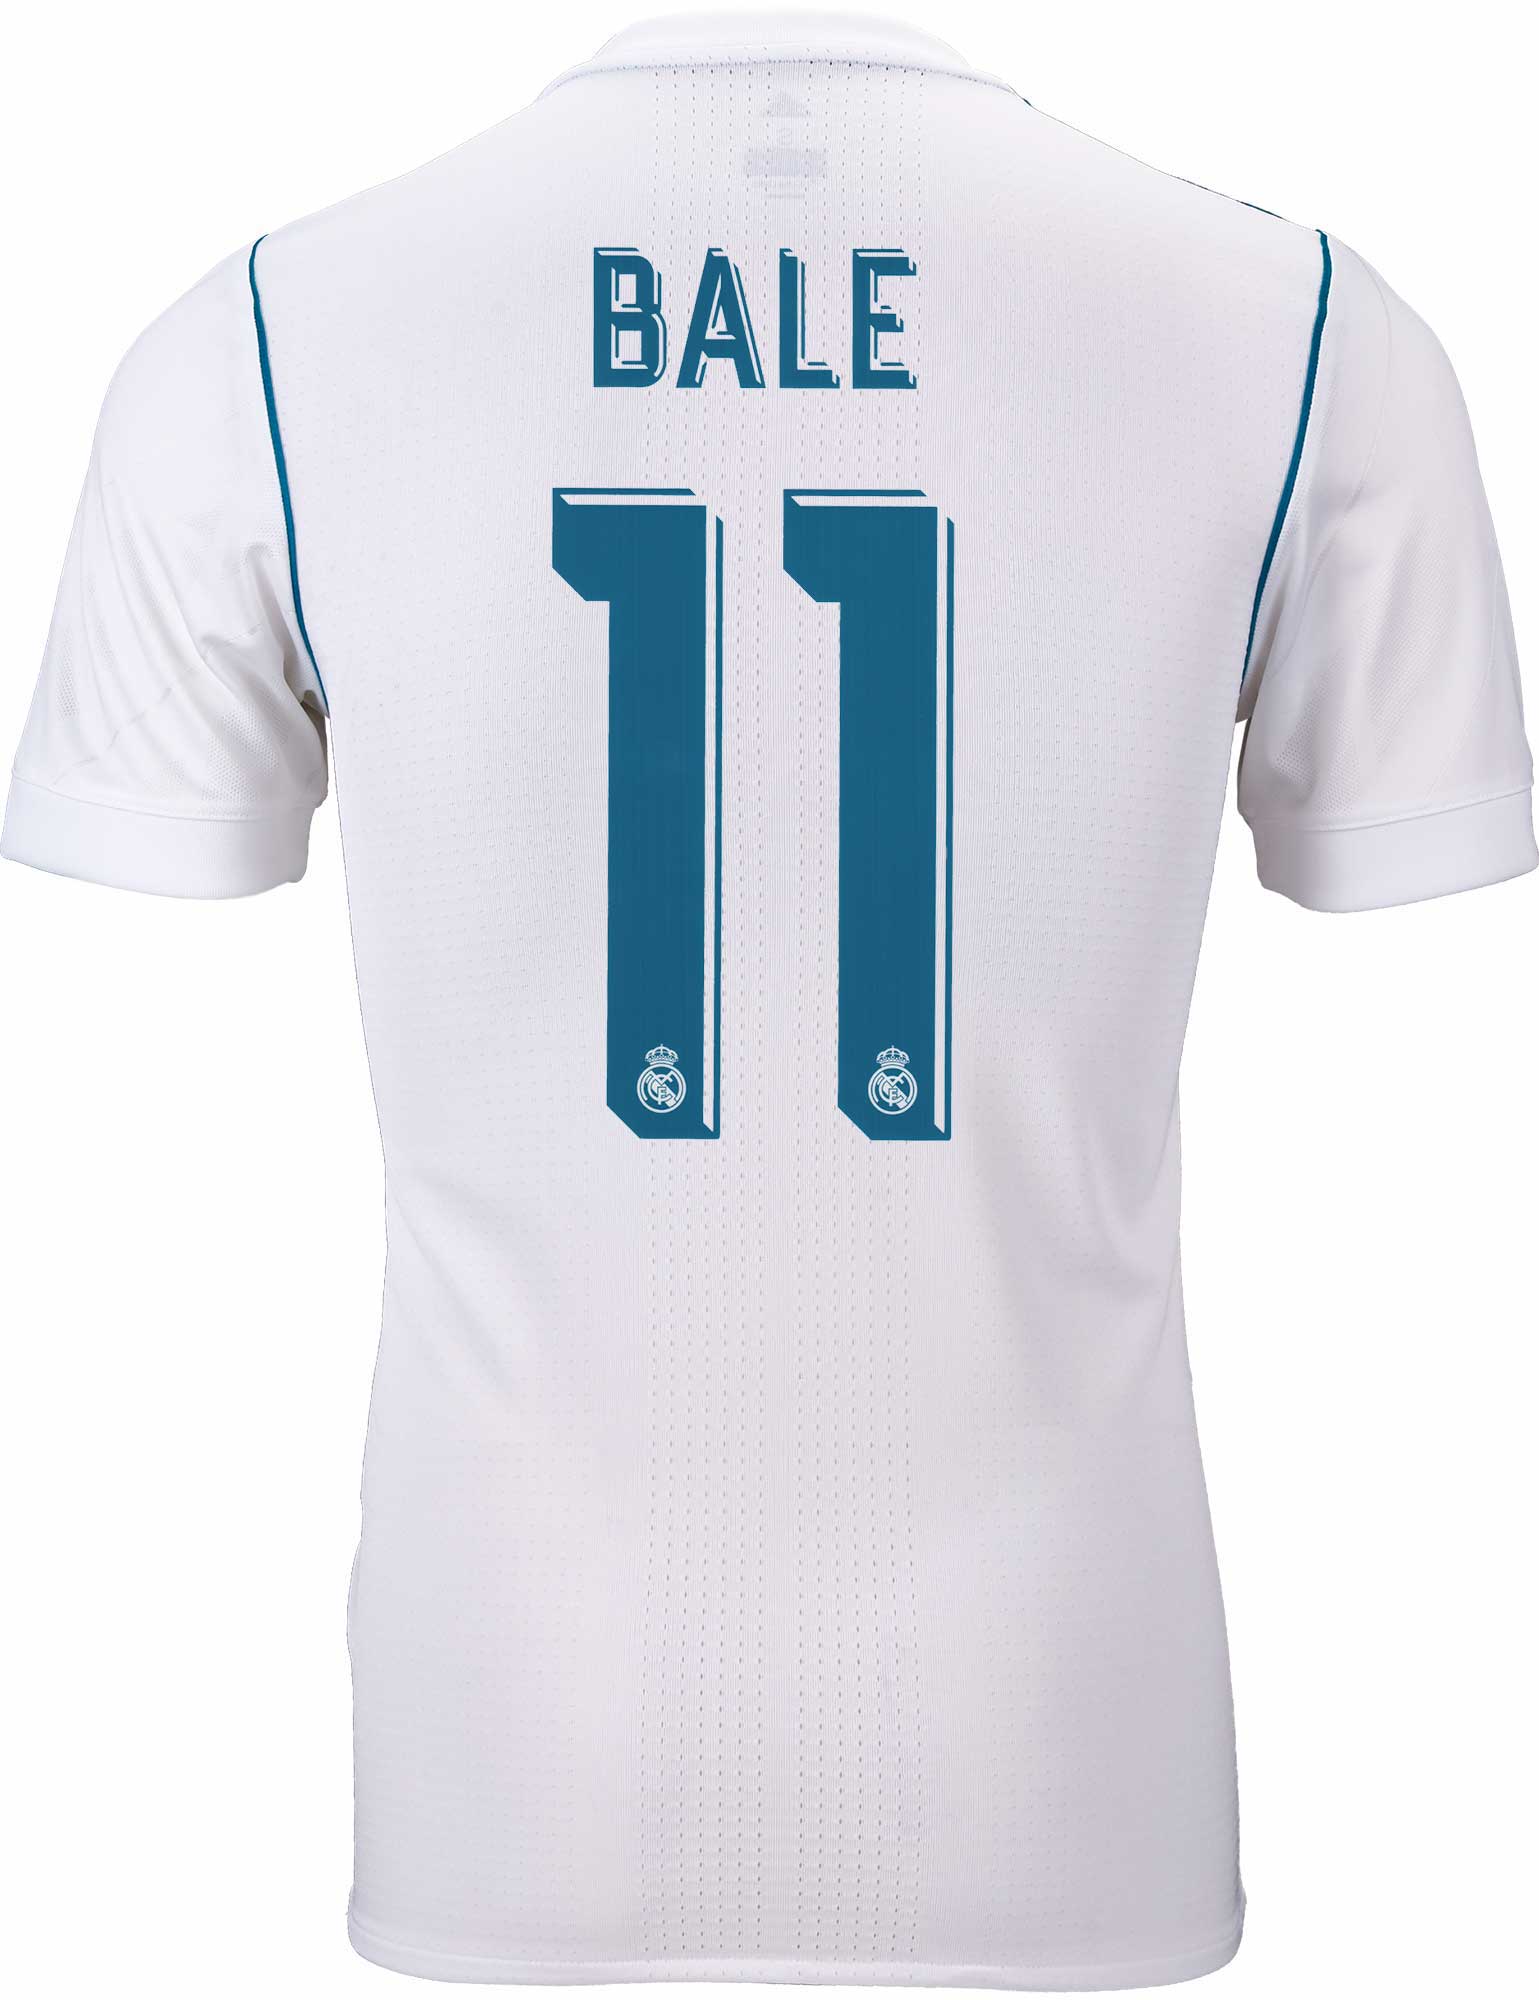 real madrid jersey bale